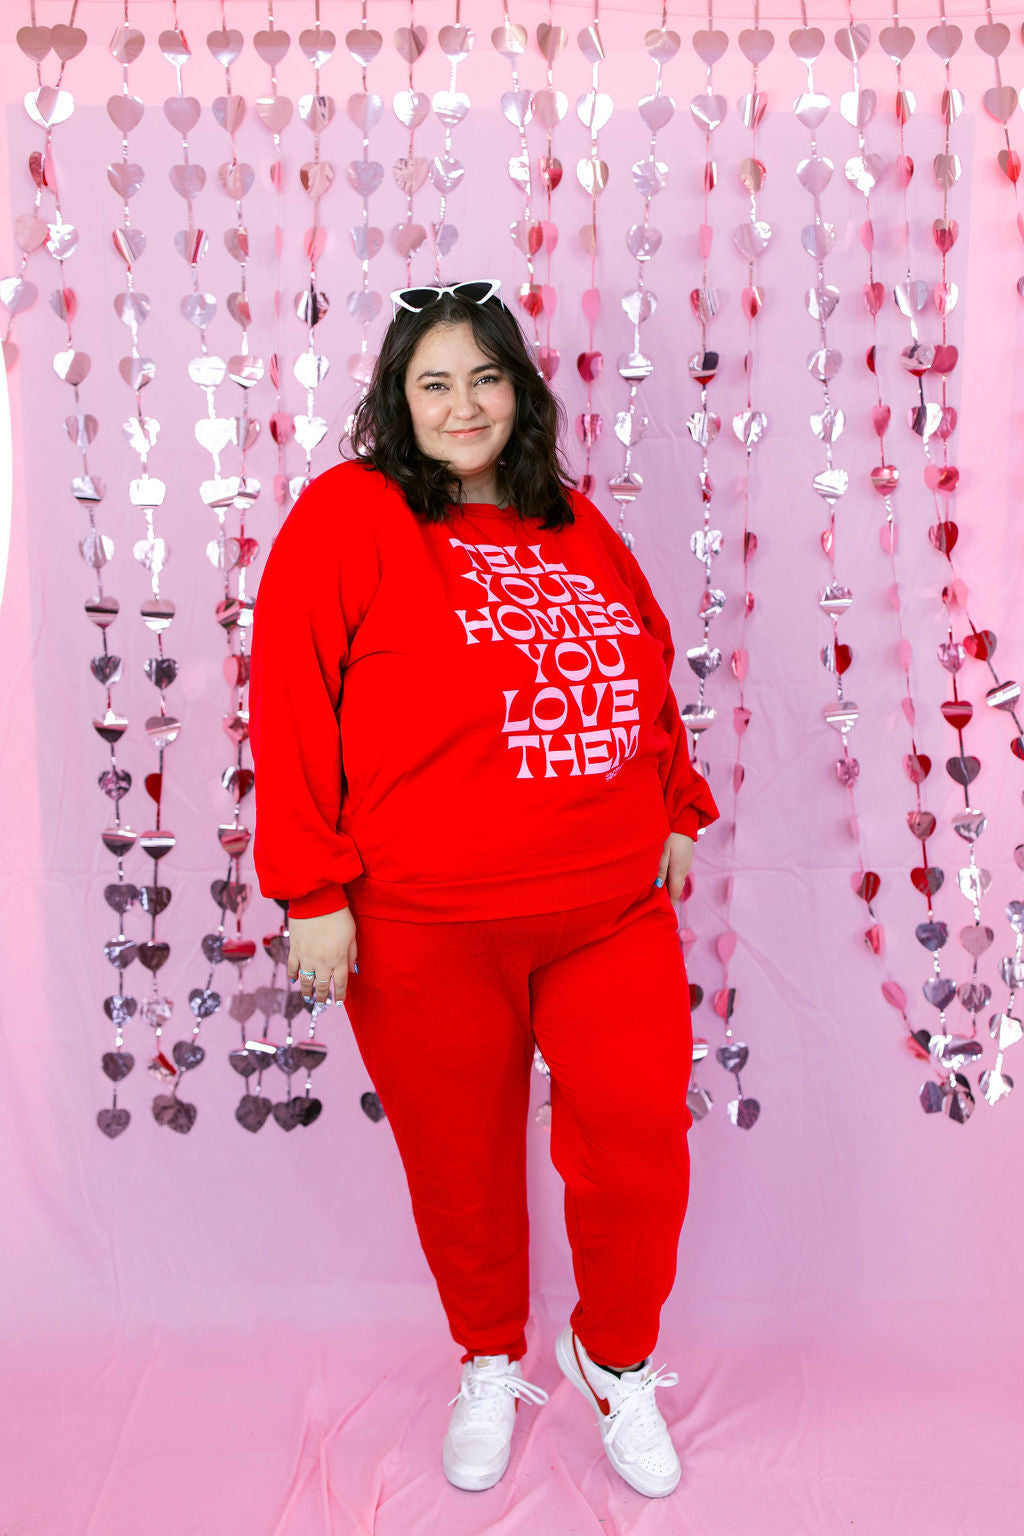 TABY ORIGINAL DESIGN: Tell Your Homies You Love Them Set in RED*** PUFF***& ULTRA SOFT***